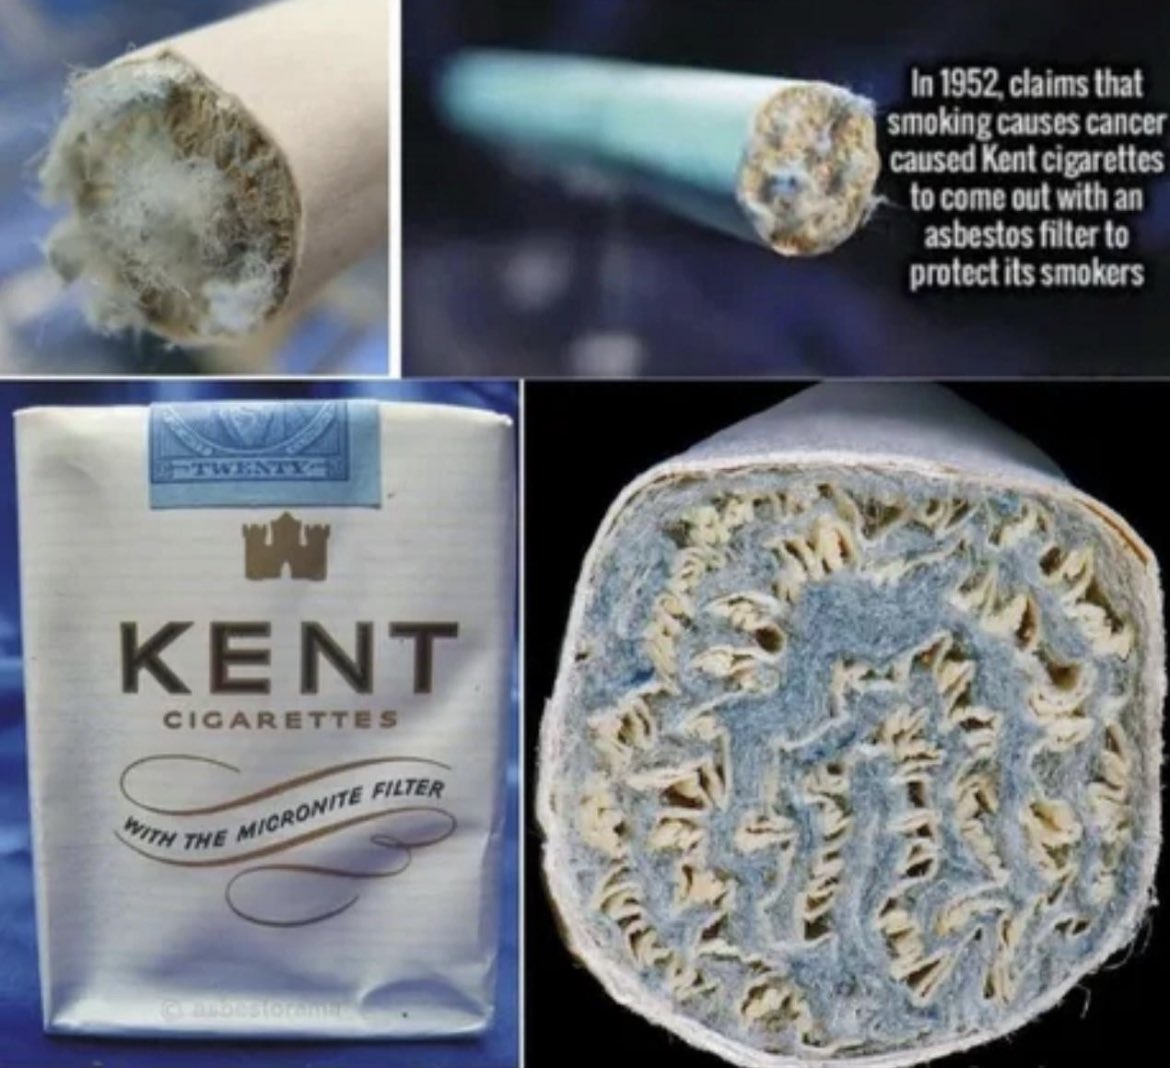 In 1952, amidst concerns linking smoking to cancer, Kent cigarettes introduced an asbestos filter as a measure to safeguard its smokers. With each inhalation, asbestos fibers from the filter made their way into the lungs of smokers.